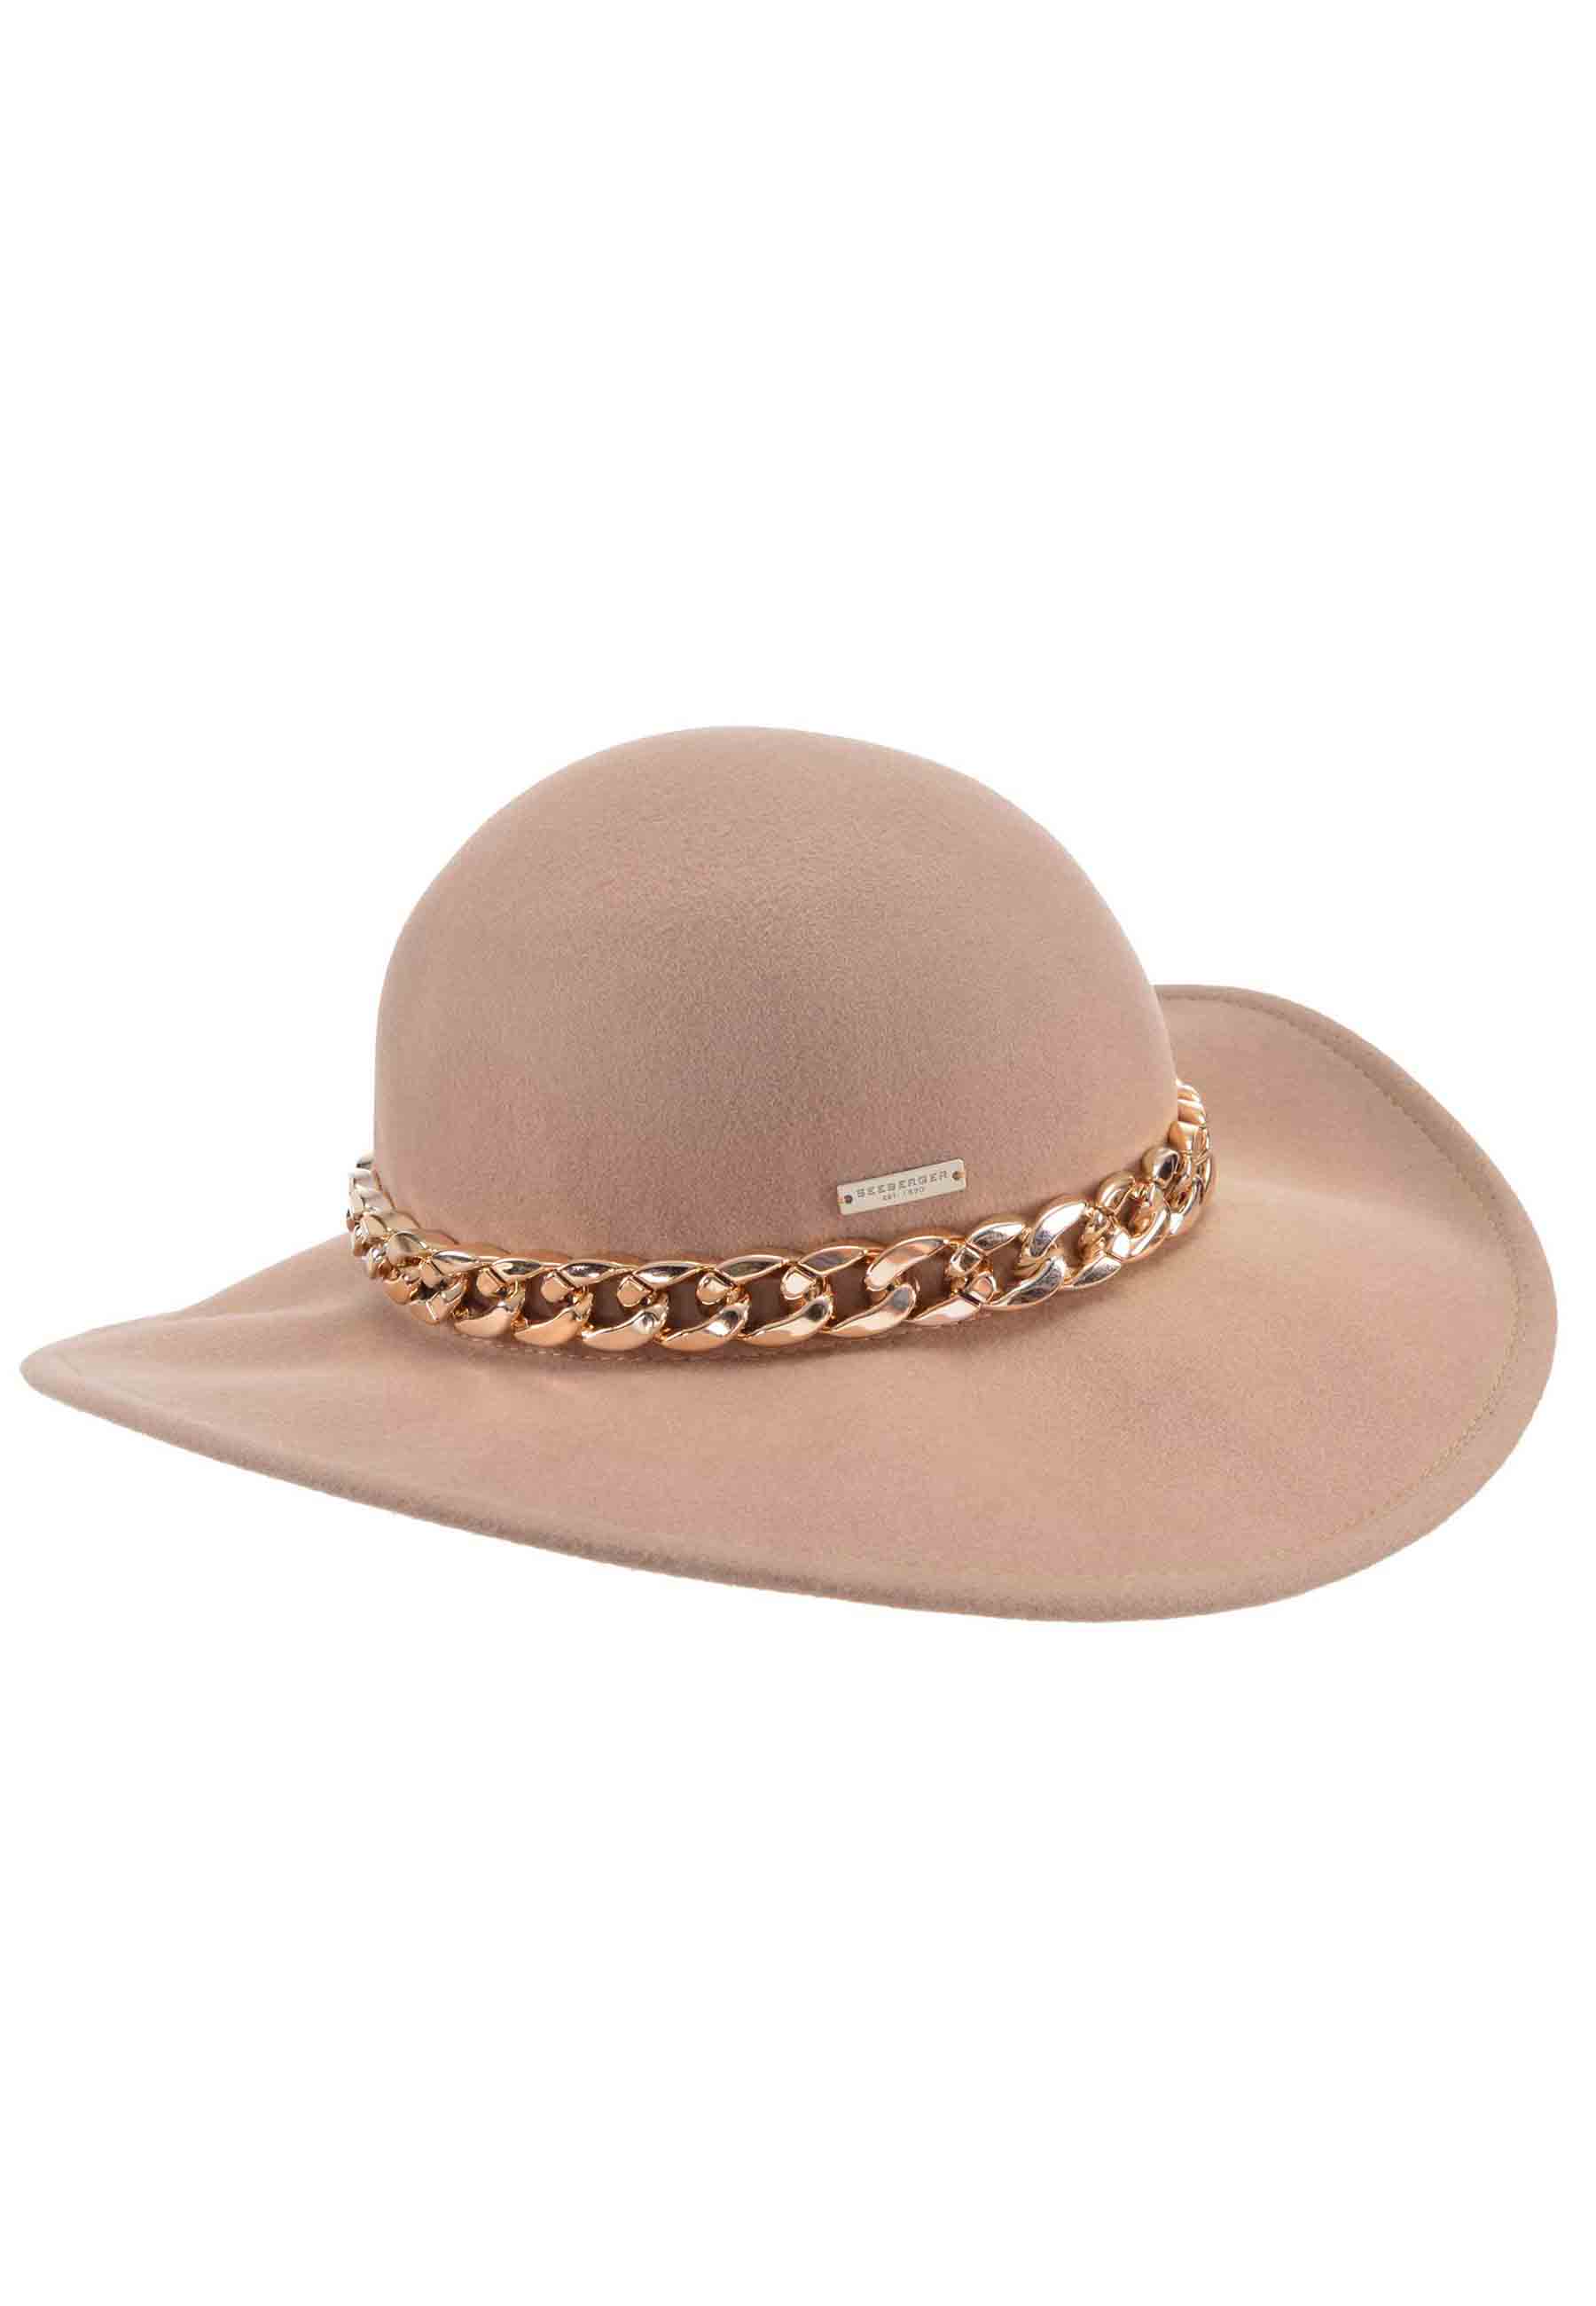 Women's camel wool hat with gold chain